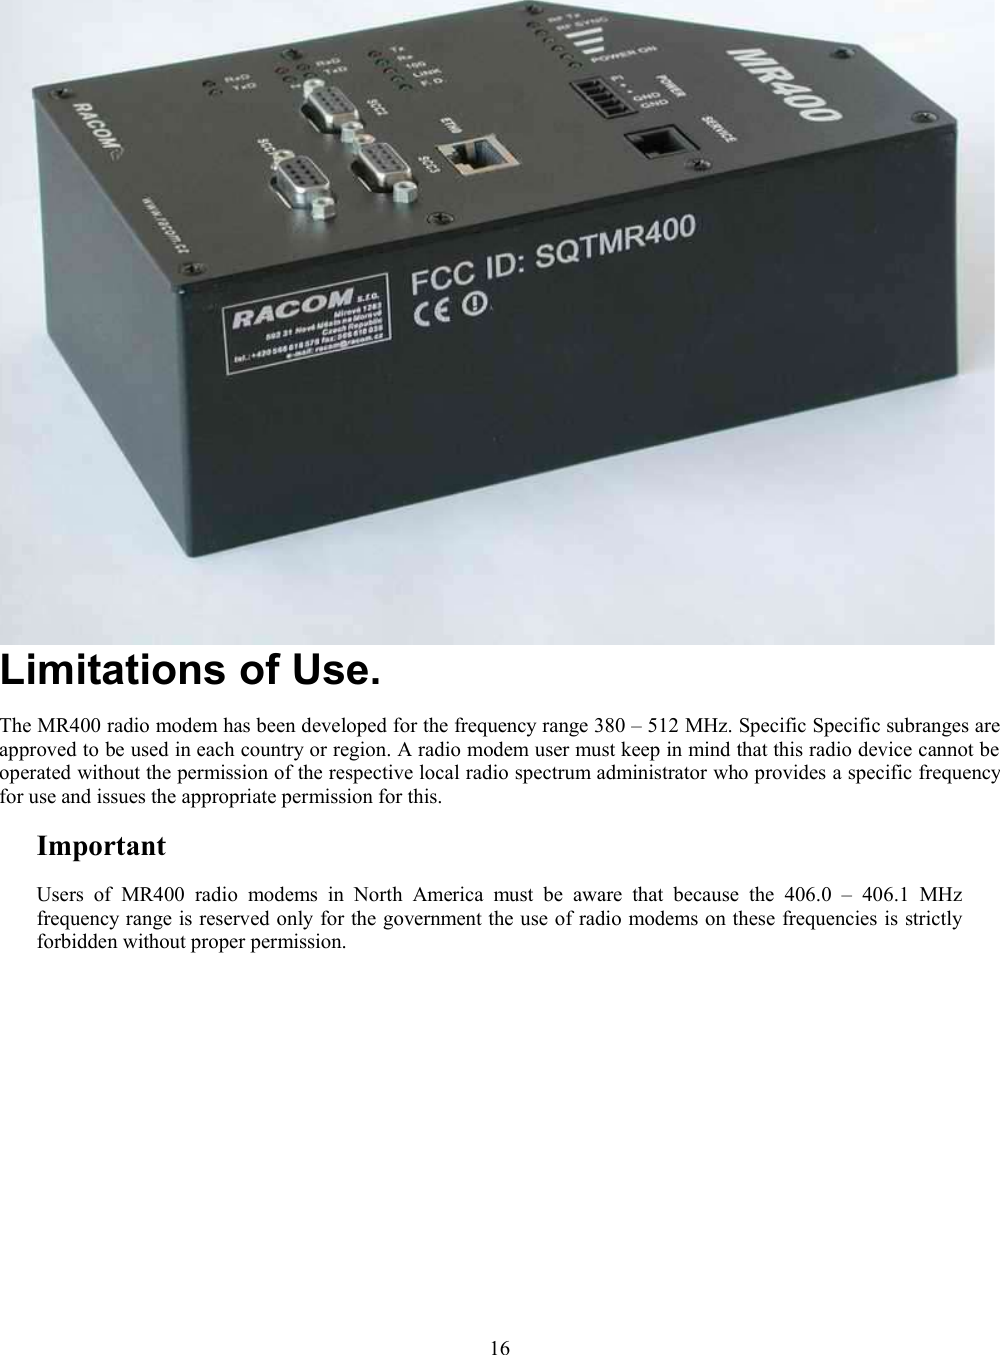 Limitations of Use.The MR400 radio modem has been developed for the frequency range 380 – 512 MHz. Specific Specific subranges areapproved to be used in each country or region. A radio modem user must keep in mind that this radio device cannot beoperated without the permission of the respective local radio spectrum administrator who provides a specific frequencyfor use and issues the appropriate permission for this. ImportantUsers   of  MR400  radio  modems  in   North America must  be  aware  that   because the   406.0   –  406.1  MHzfrequency range is reserved only for the government the use of radio modems on these frequencies is strictlyforbidden without proper permission.16